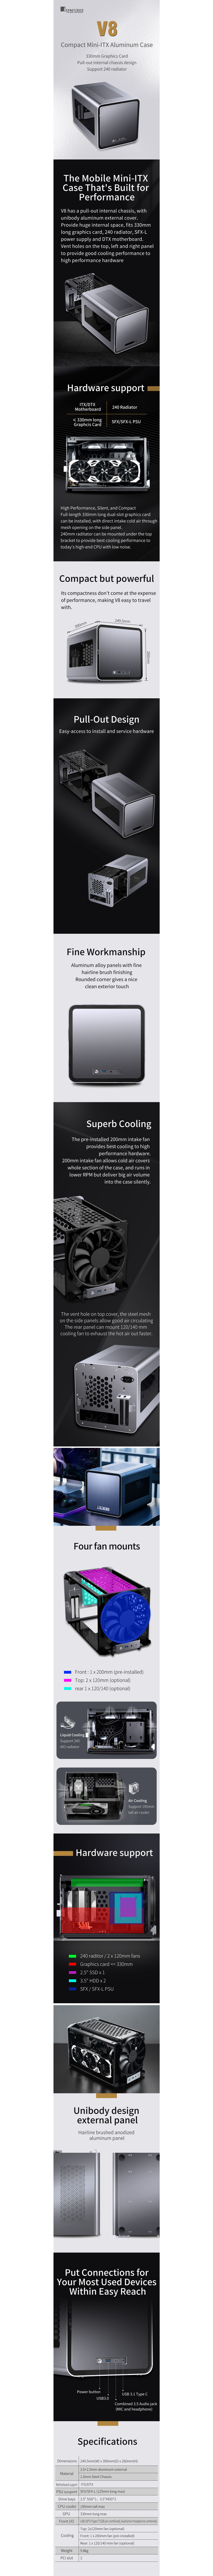 A large marketing image providing additional information about the product Jonsbo V8 Grey mITX Case w/Side Panel Window - Additional alt info not provided